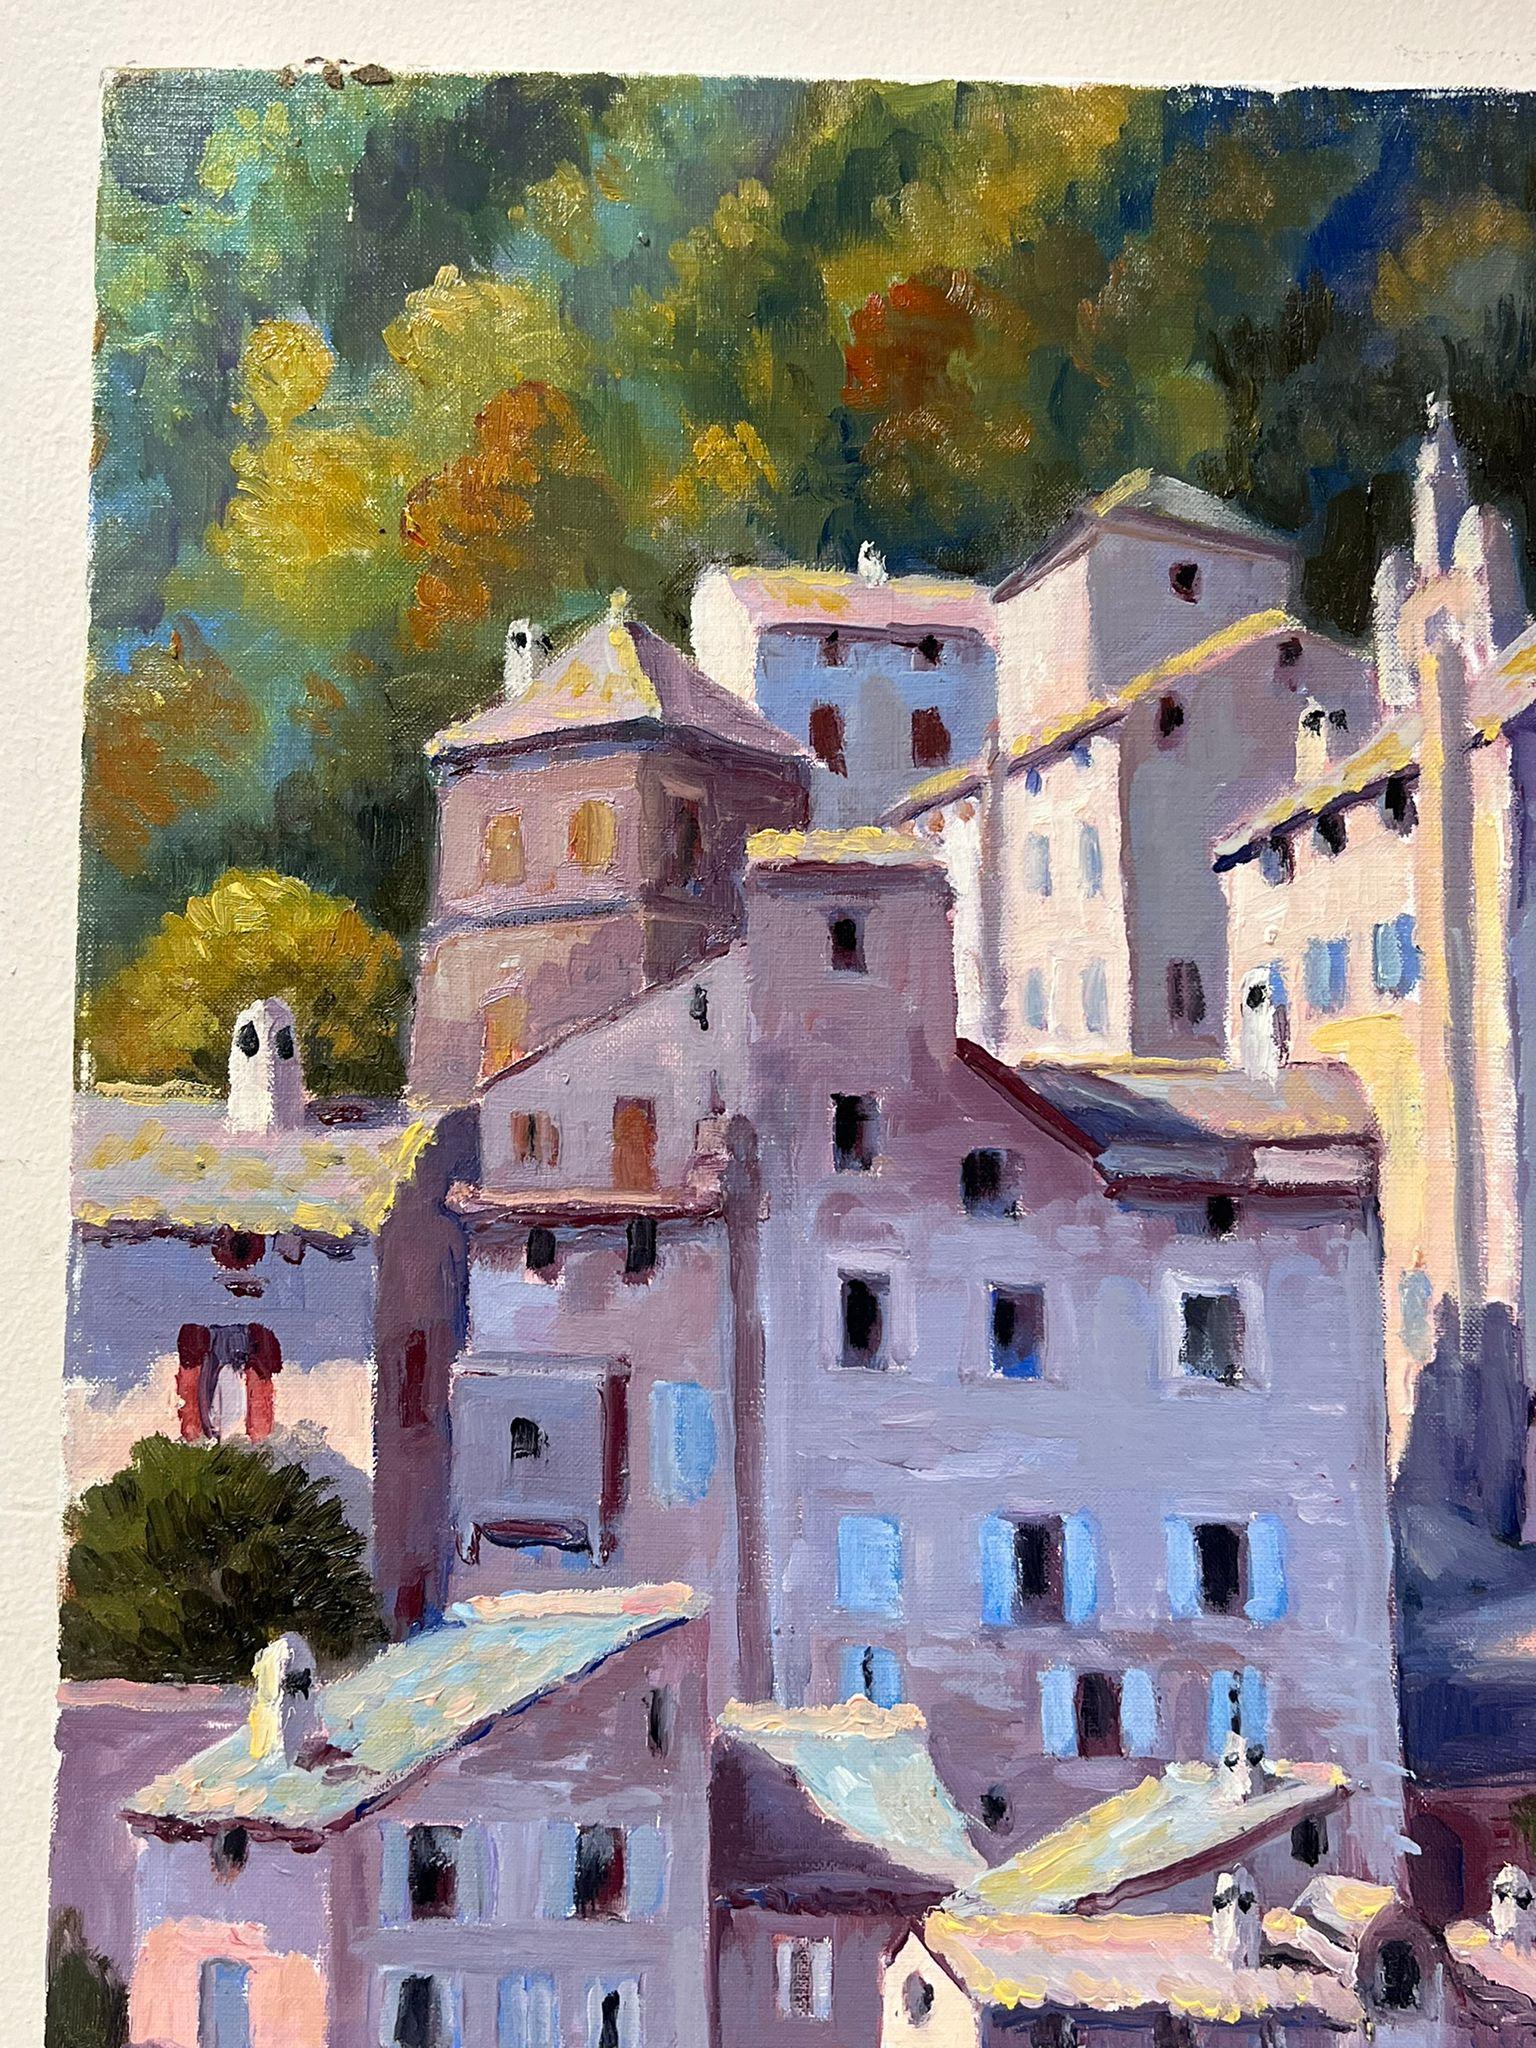 The Old Town (Italy?)
signed by Georges Bordonave (French contemporary)   
dated 1998
oil painting on canvas, unframed
unframed: 22 x 18.5 inches
condition: very good
provenance: from a large private collection of this artists work, western Paris,